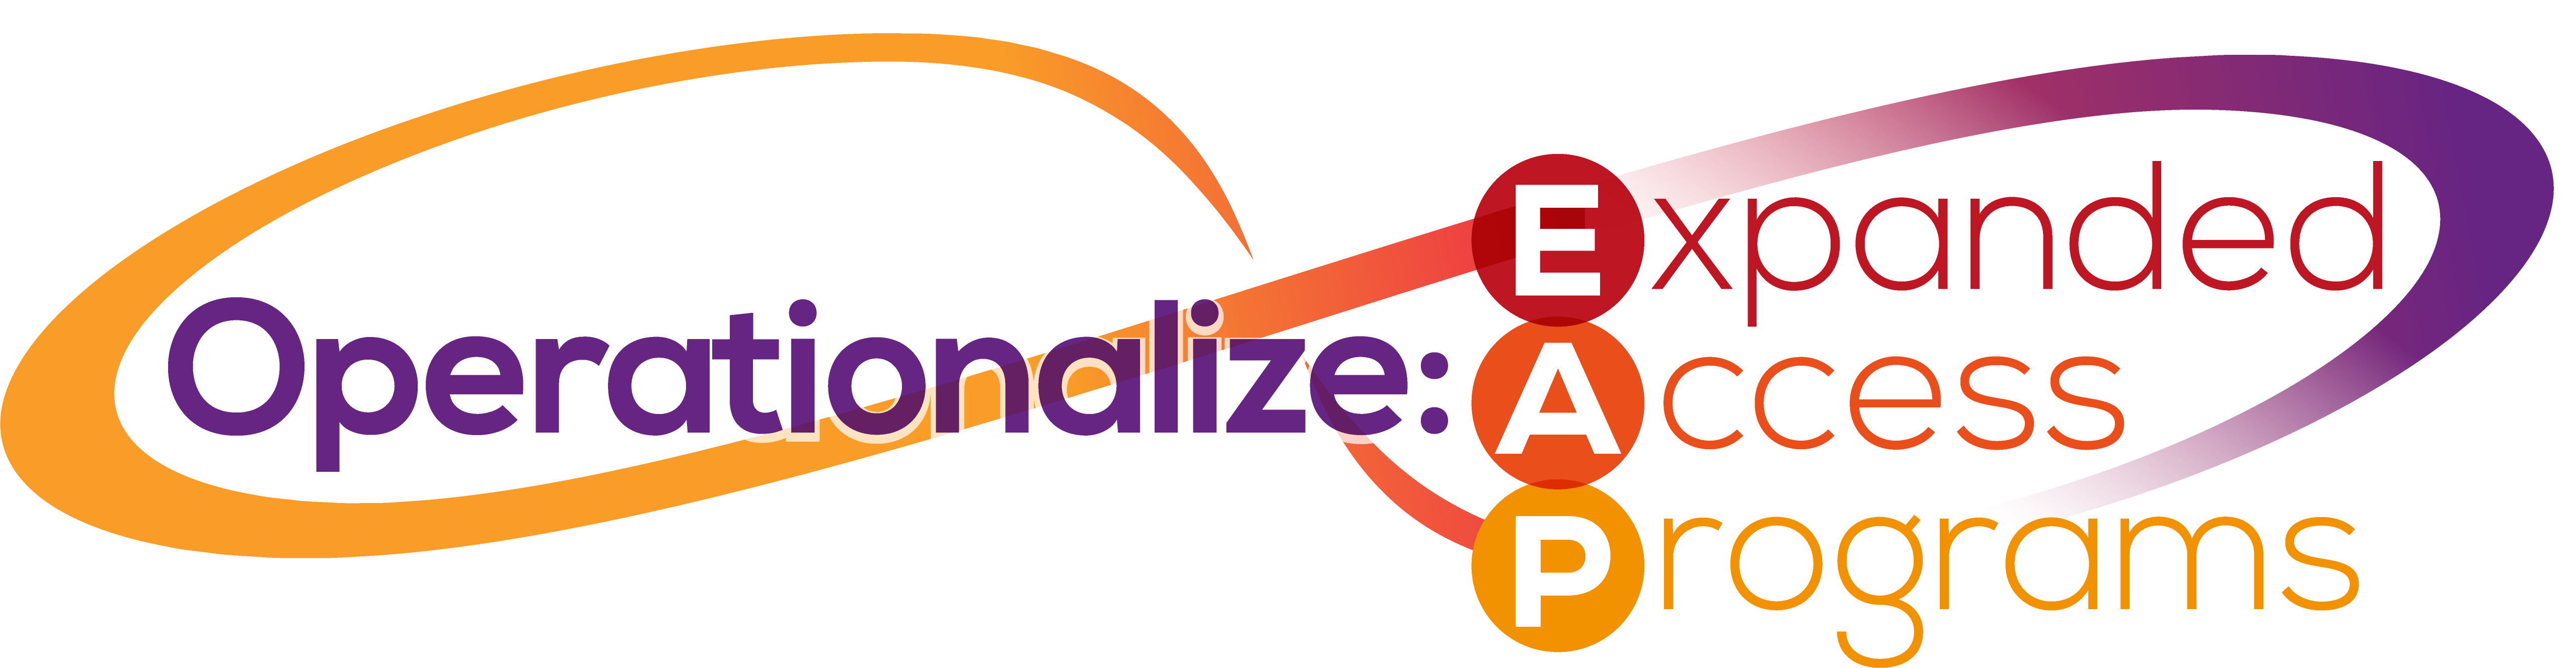 HW200901 Operationalize Expanded Access Programs logo FINAL